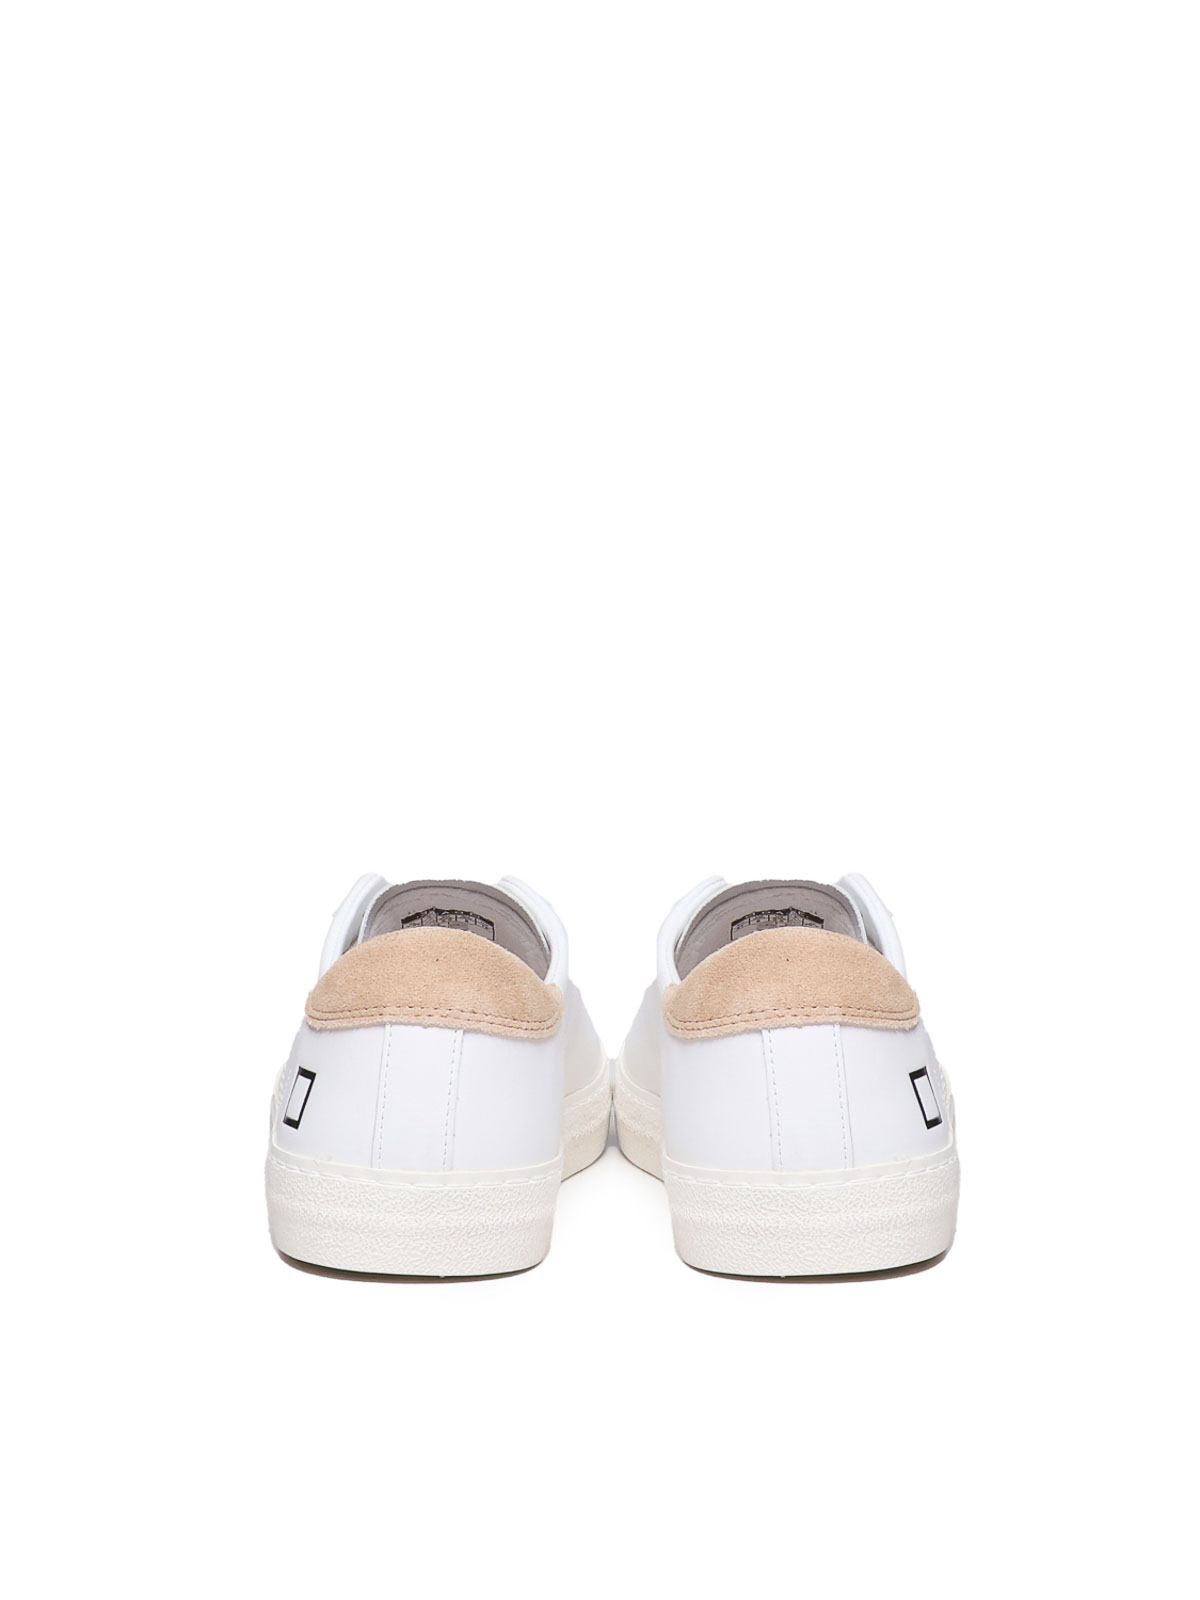 Shop Date Zapatillas - Vintage Hill In Taupe